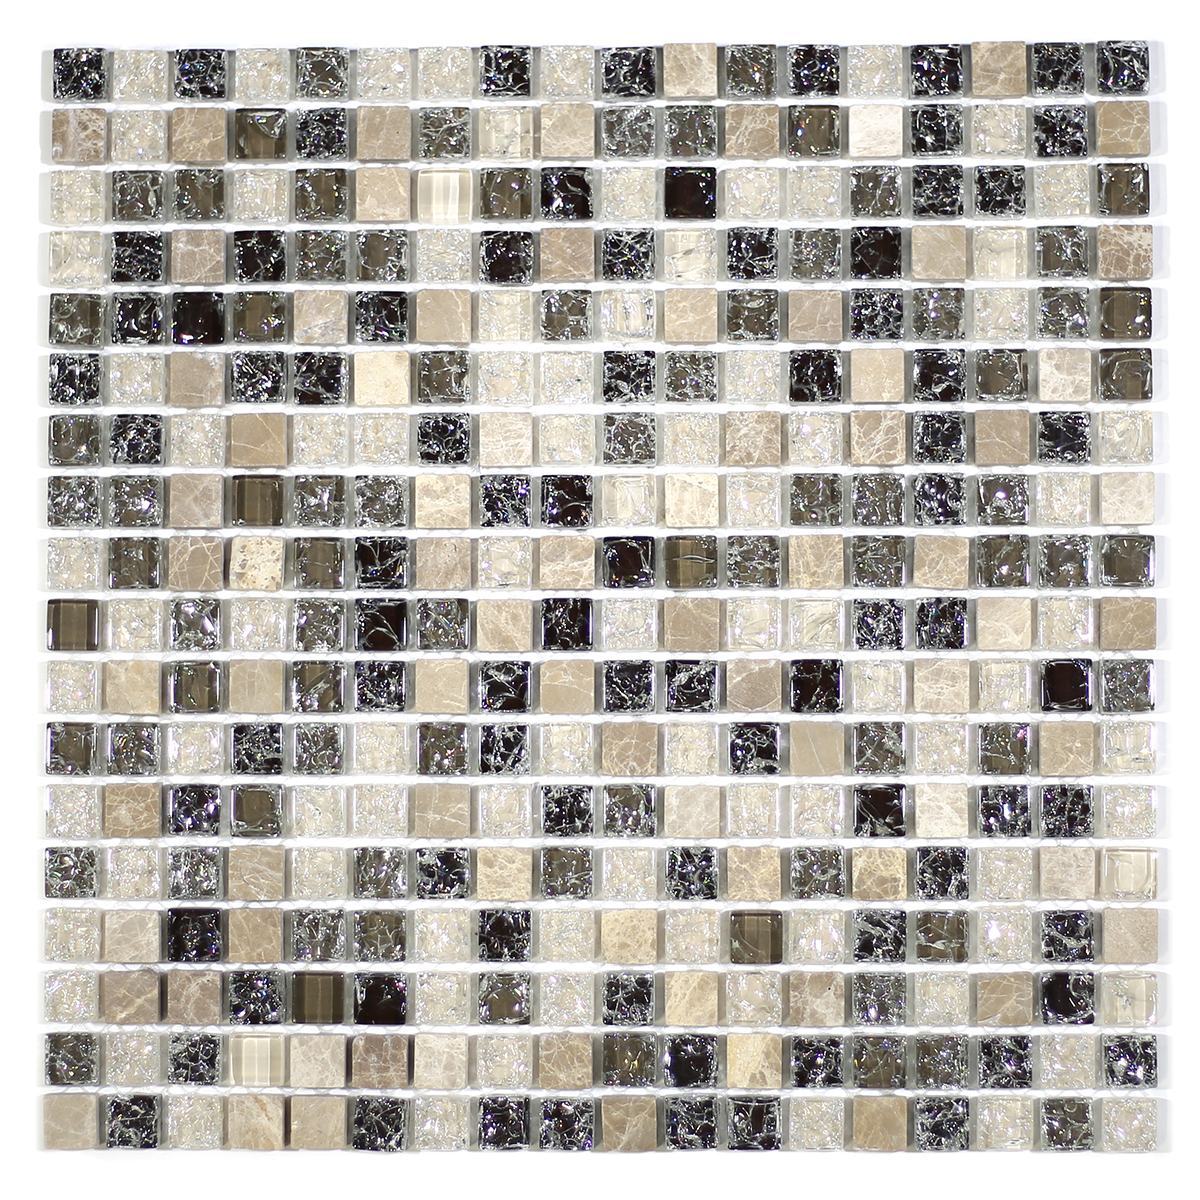 MA31-S  5/8" SQUARE GLASS AND STONE CRACKLE MOSAIC